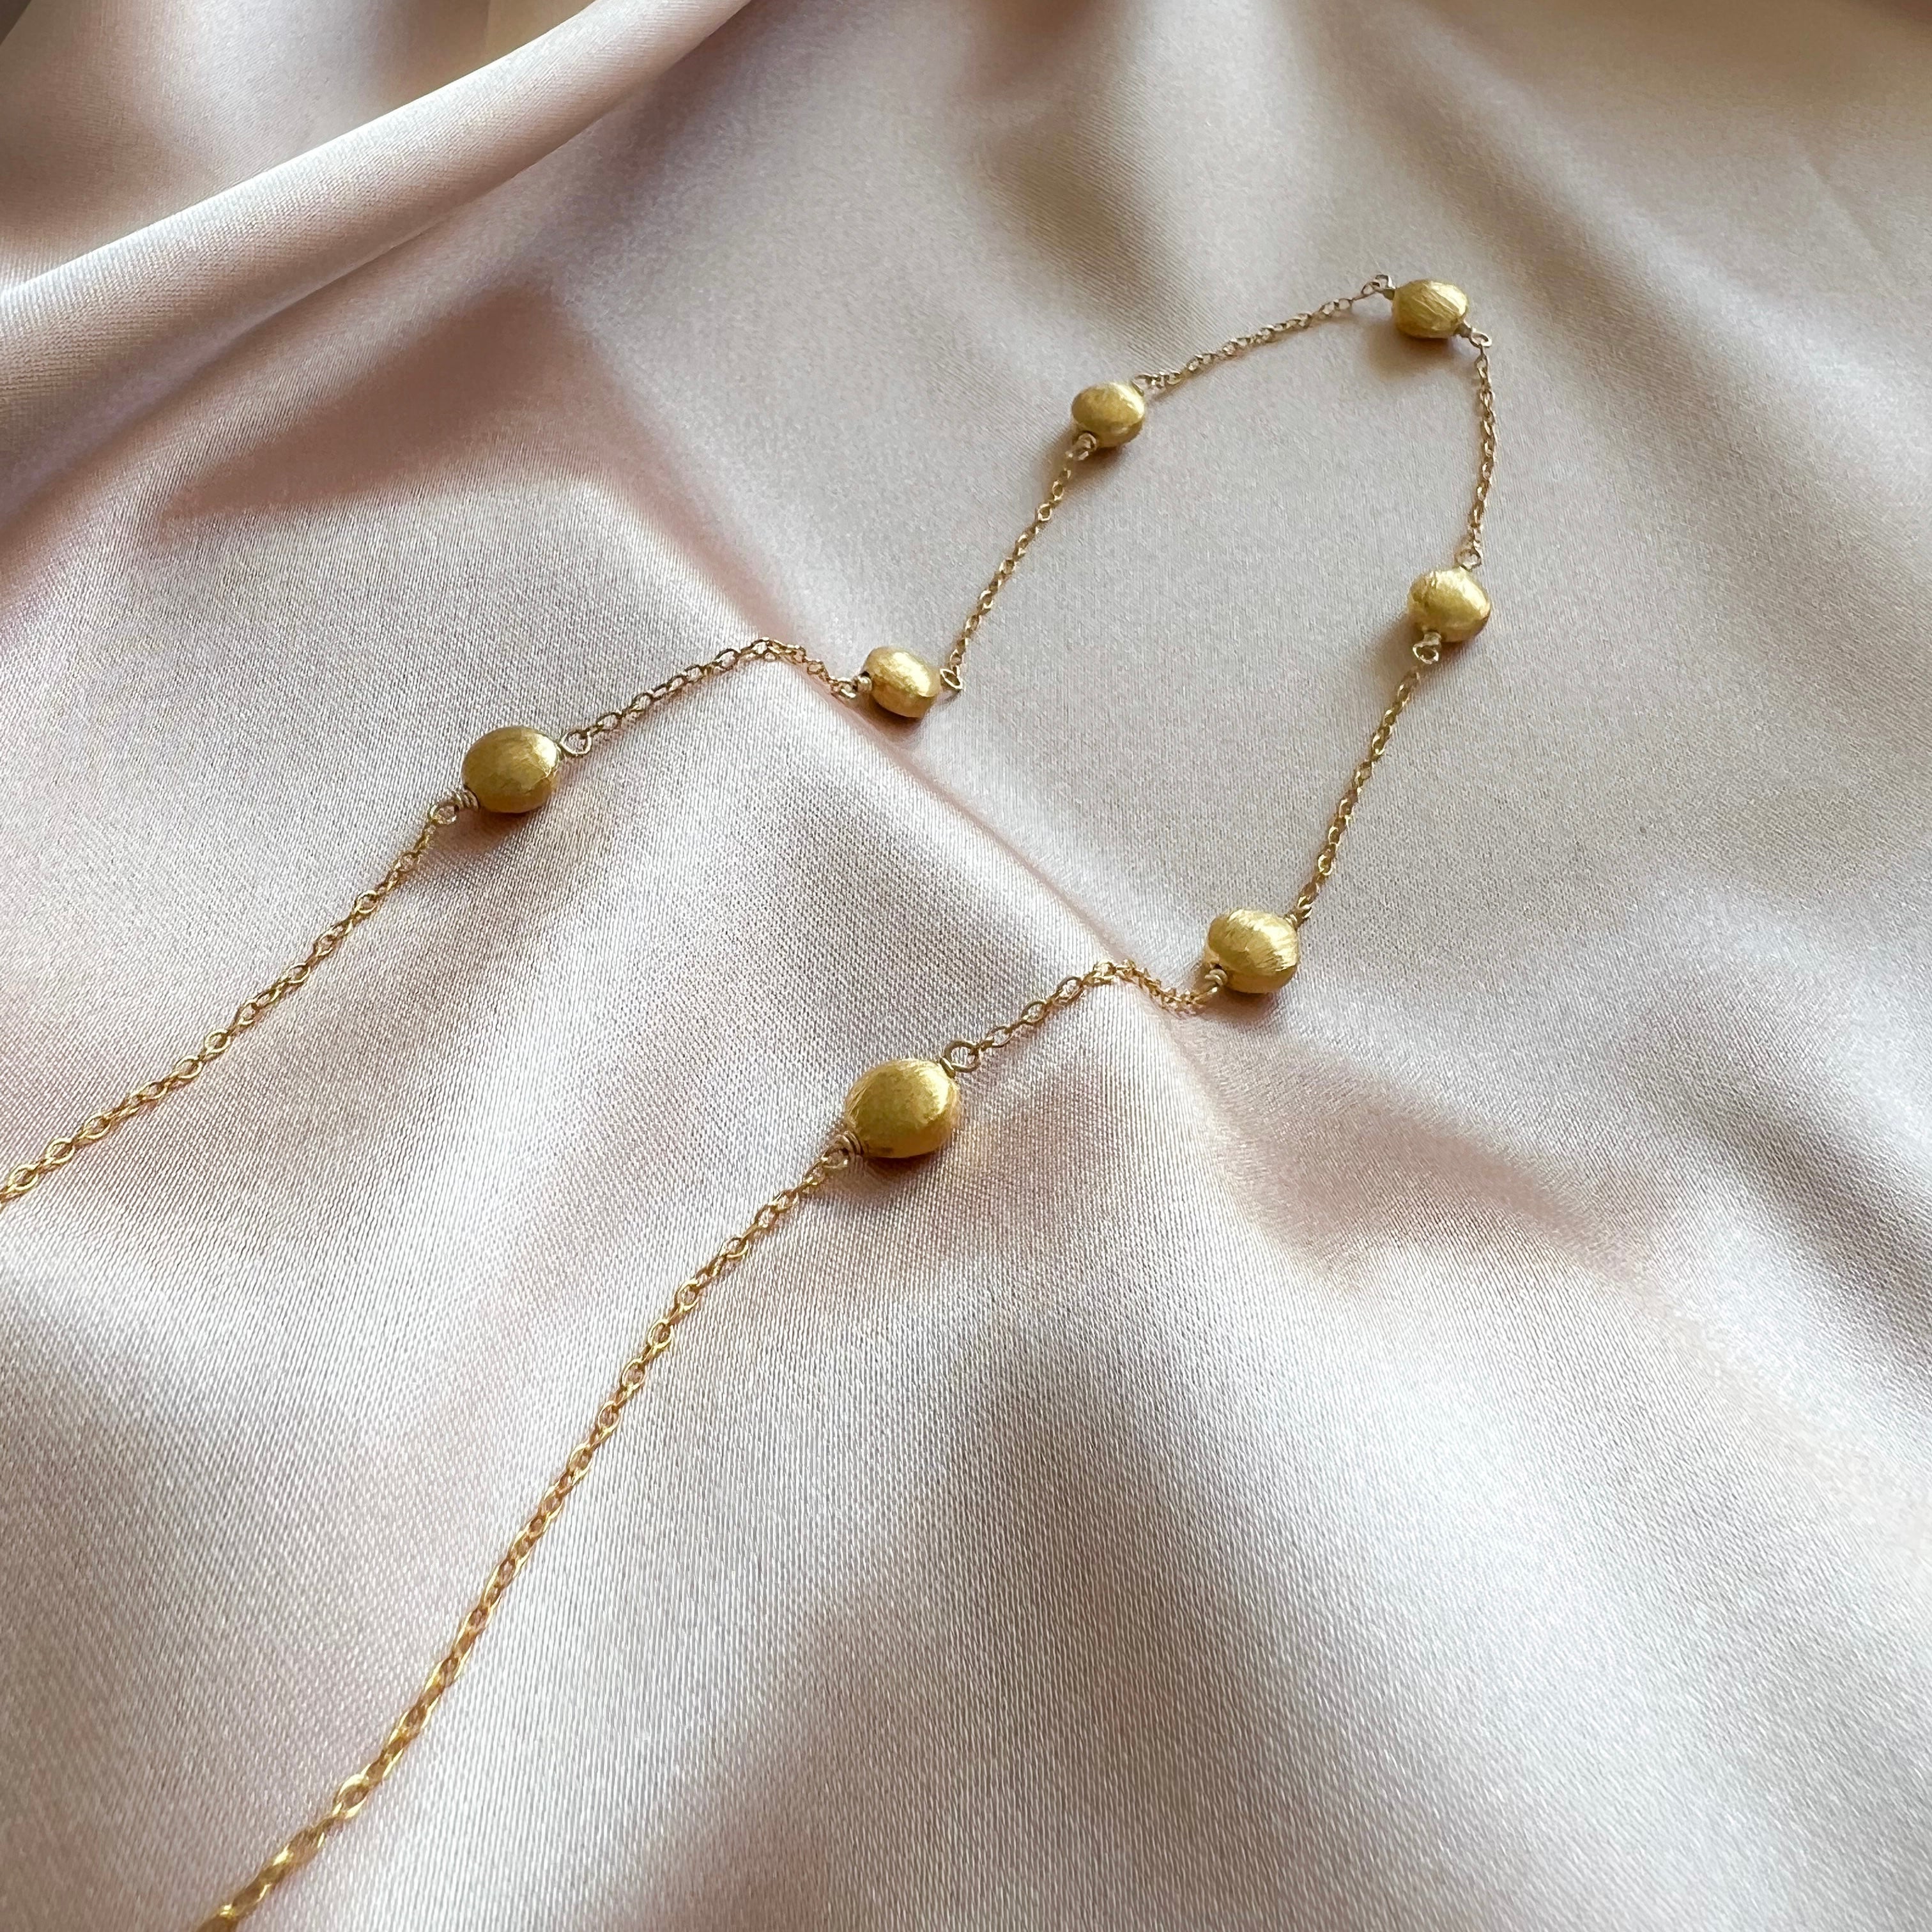 Expertly Handmade Gold Station Necklace, Adjustable from 16"-18"